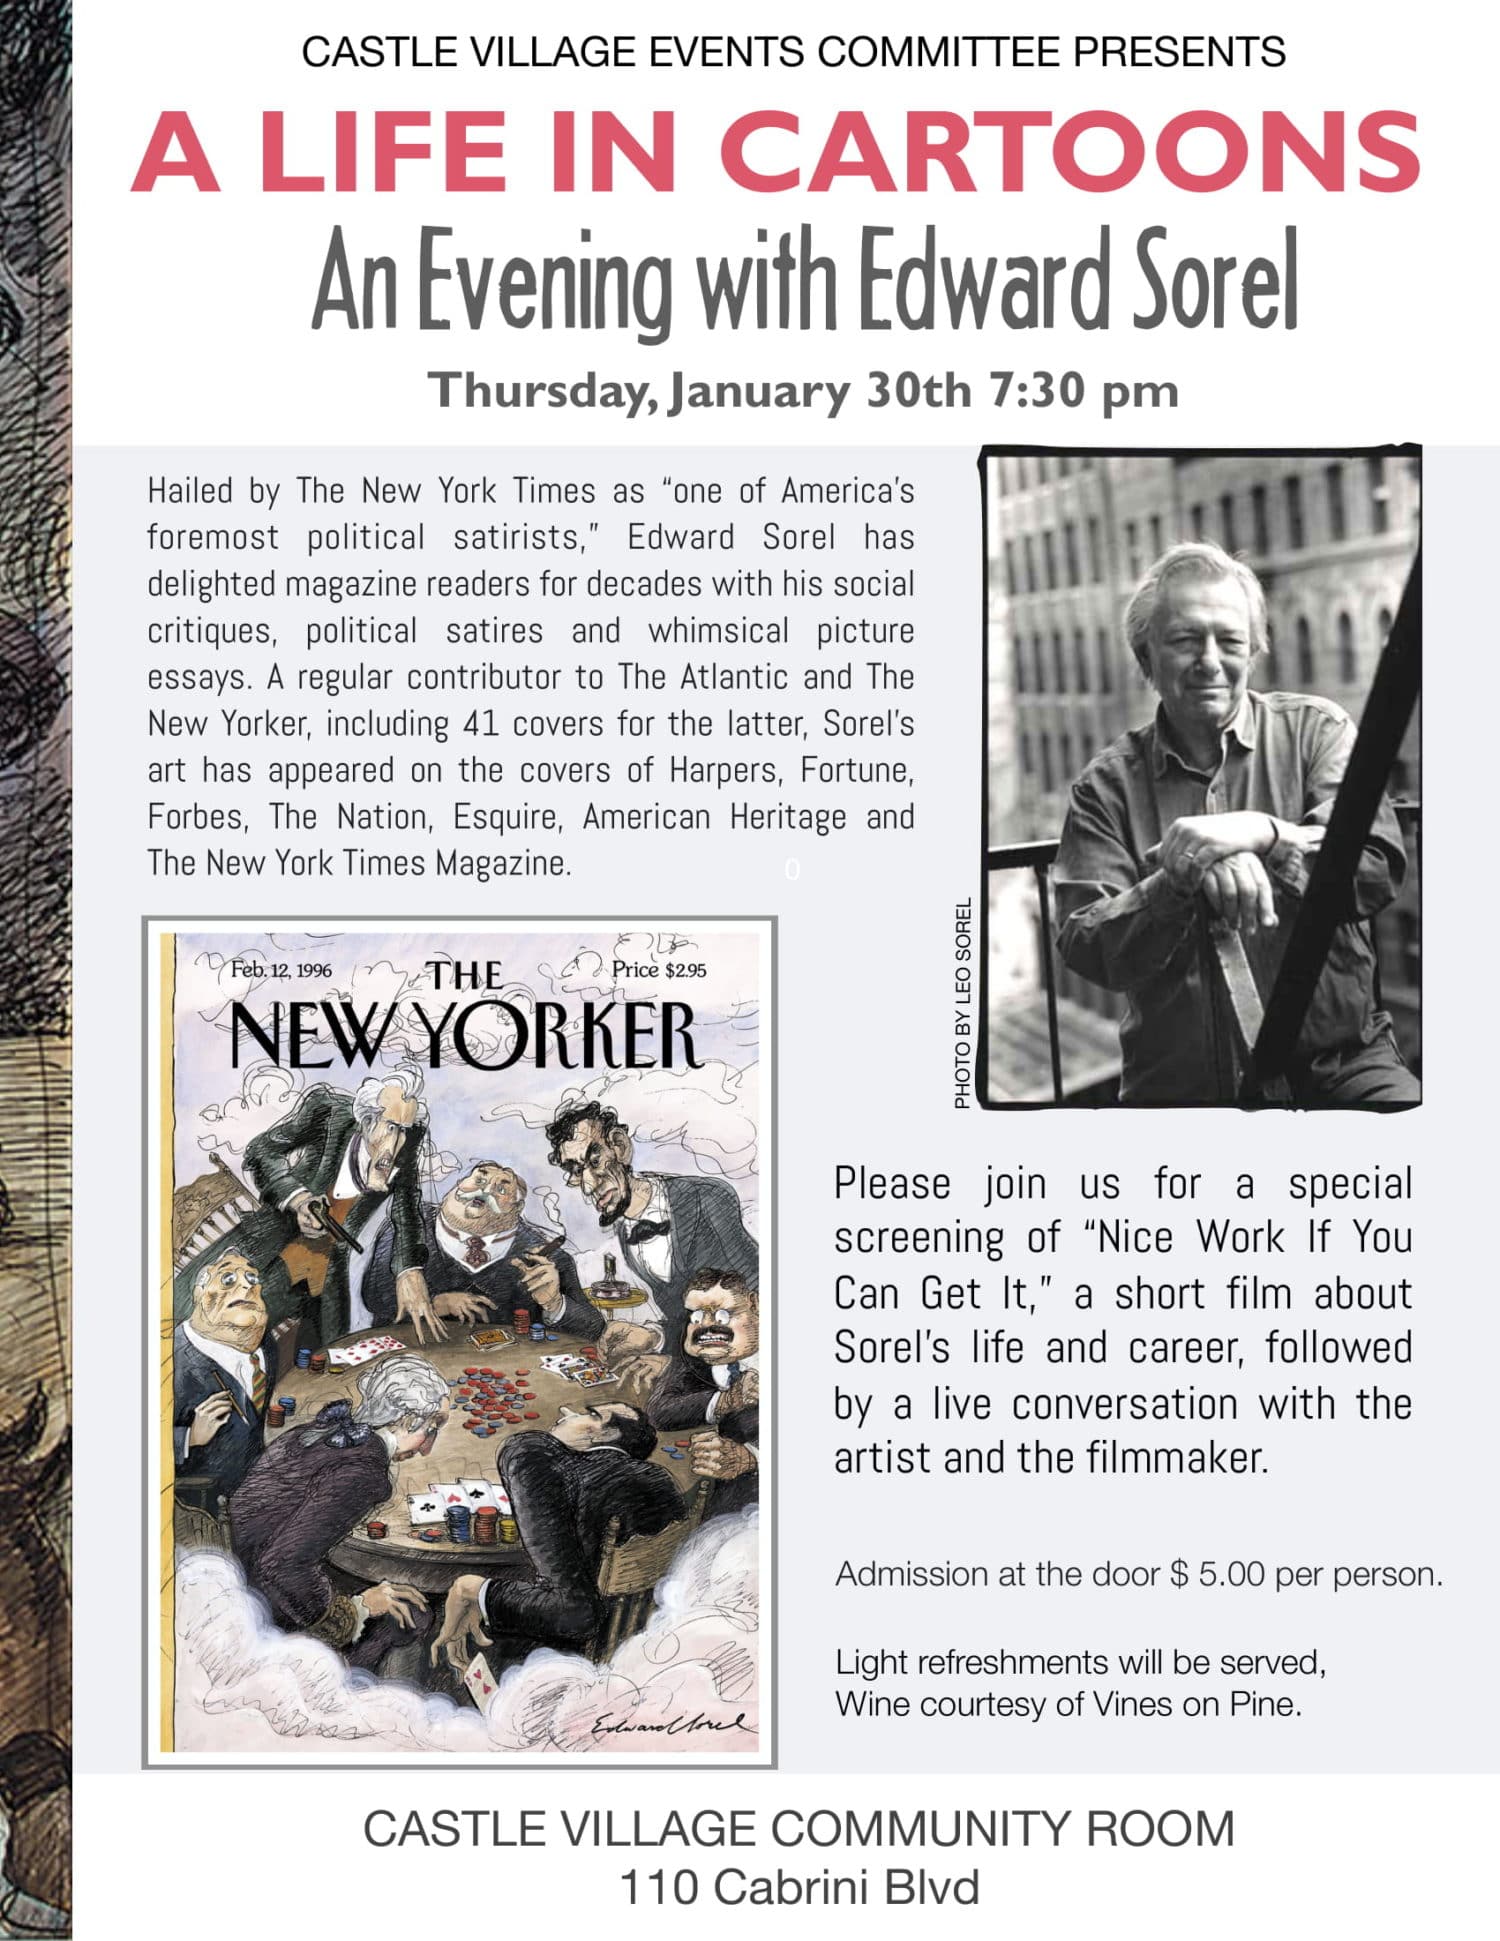 A Life in Cartoons–An Evening with Edward Sorel at Castle Village